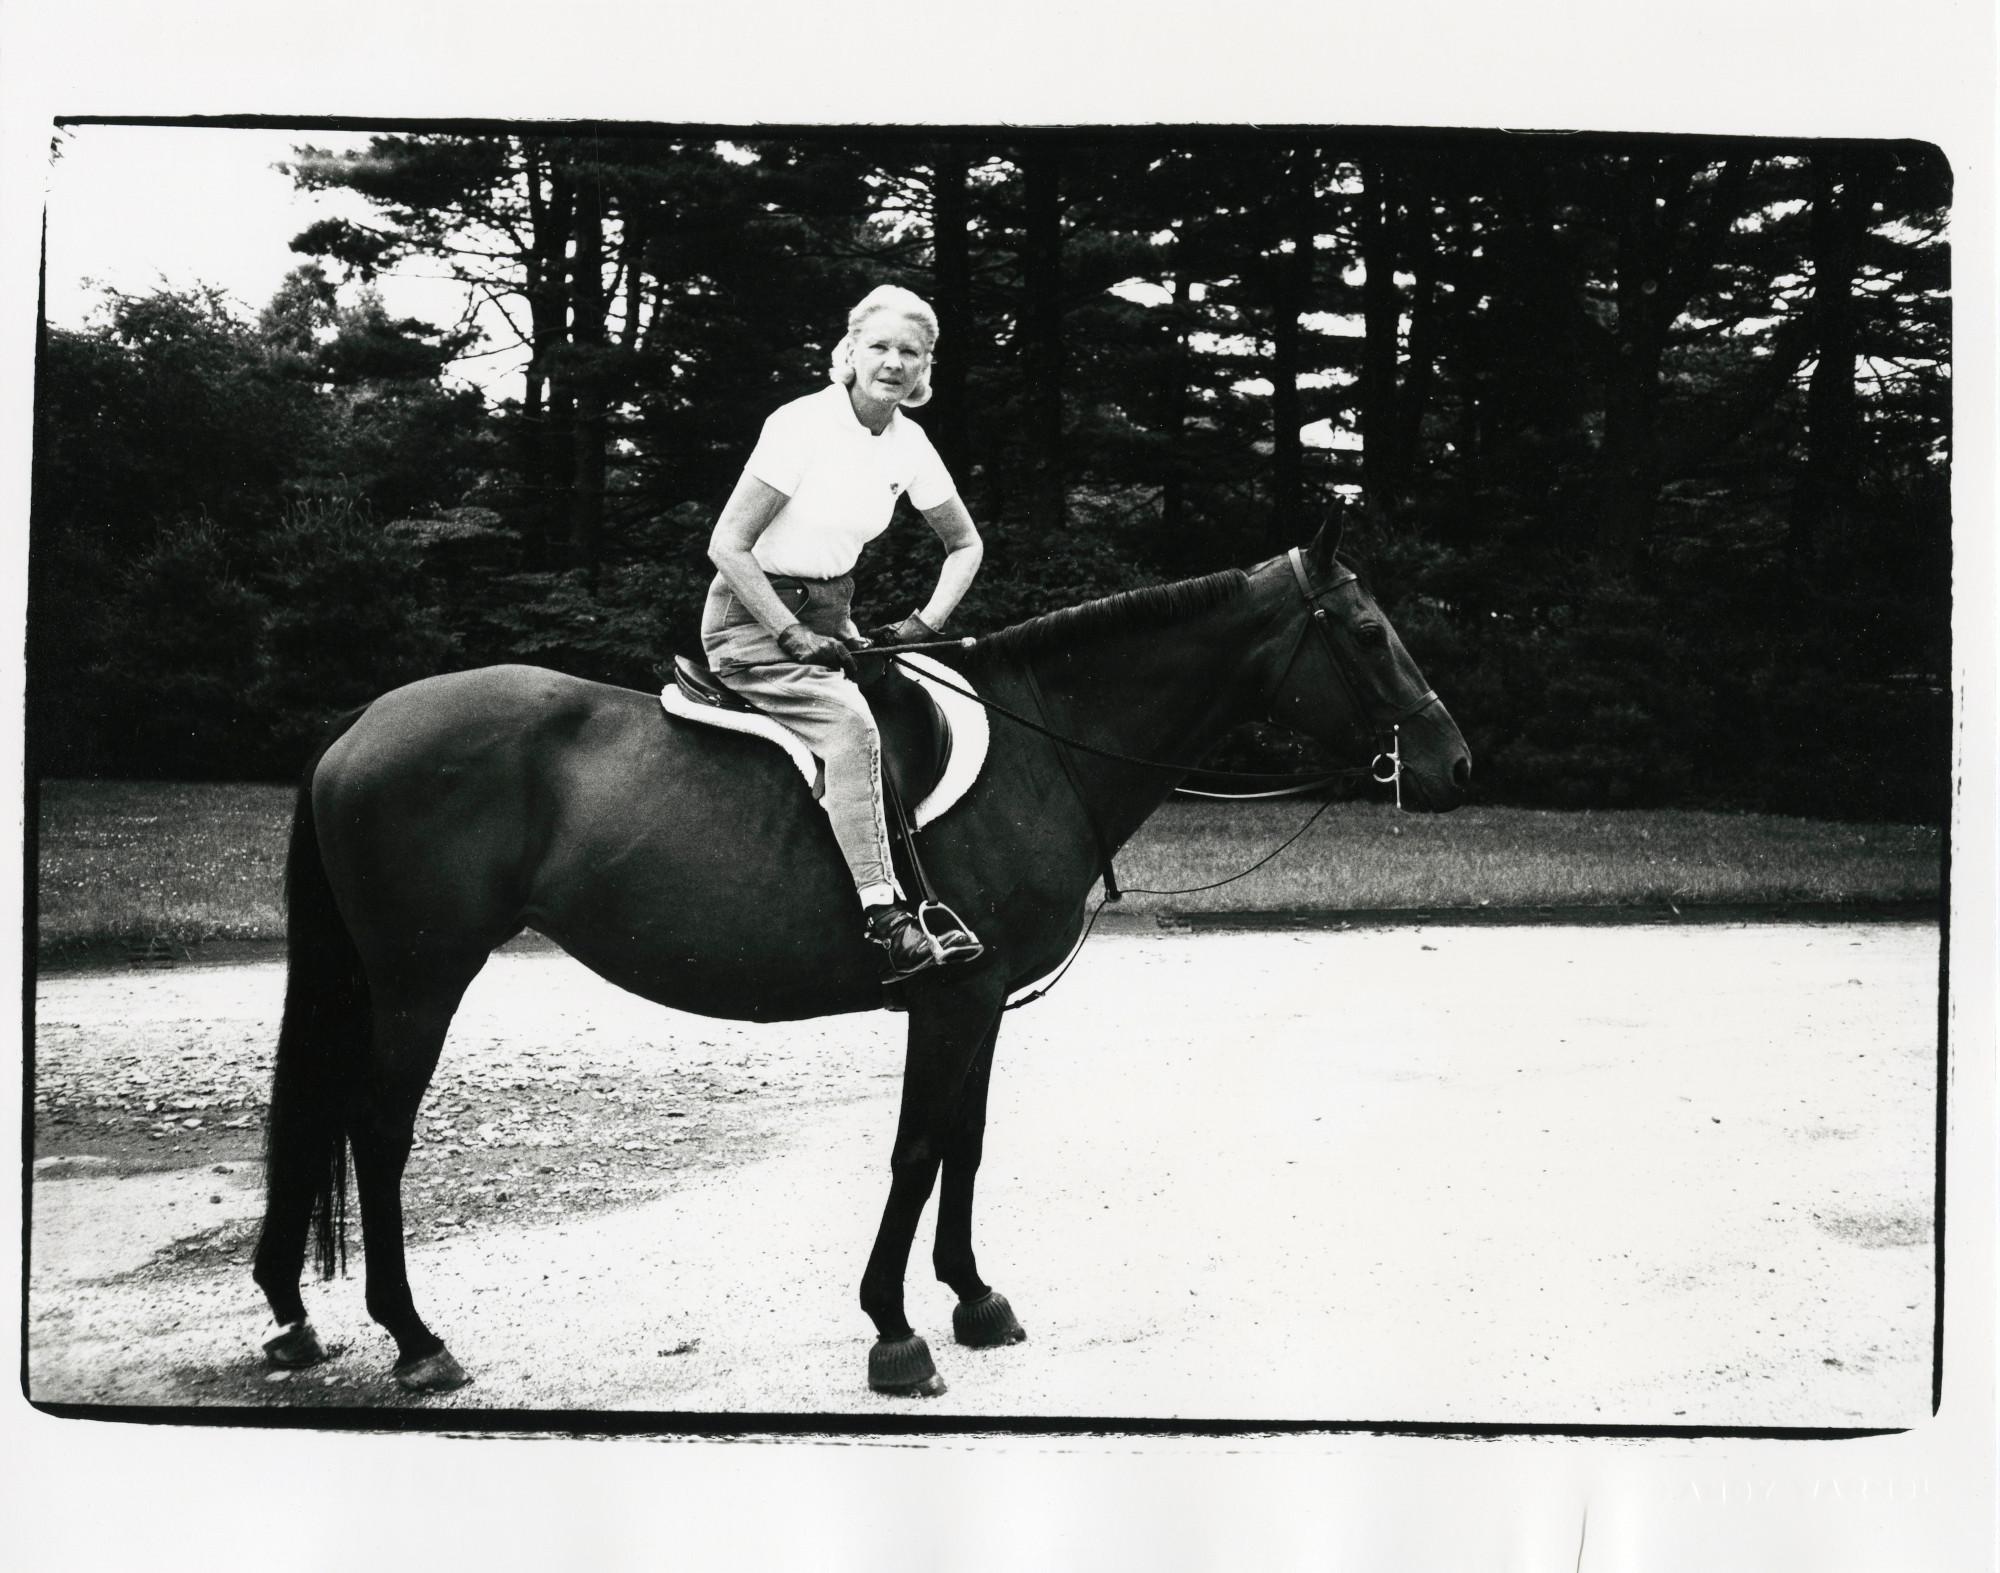 Andy Warhol Black and White Photograph - C. Z. Guest Riding Horse